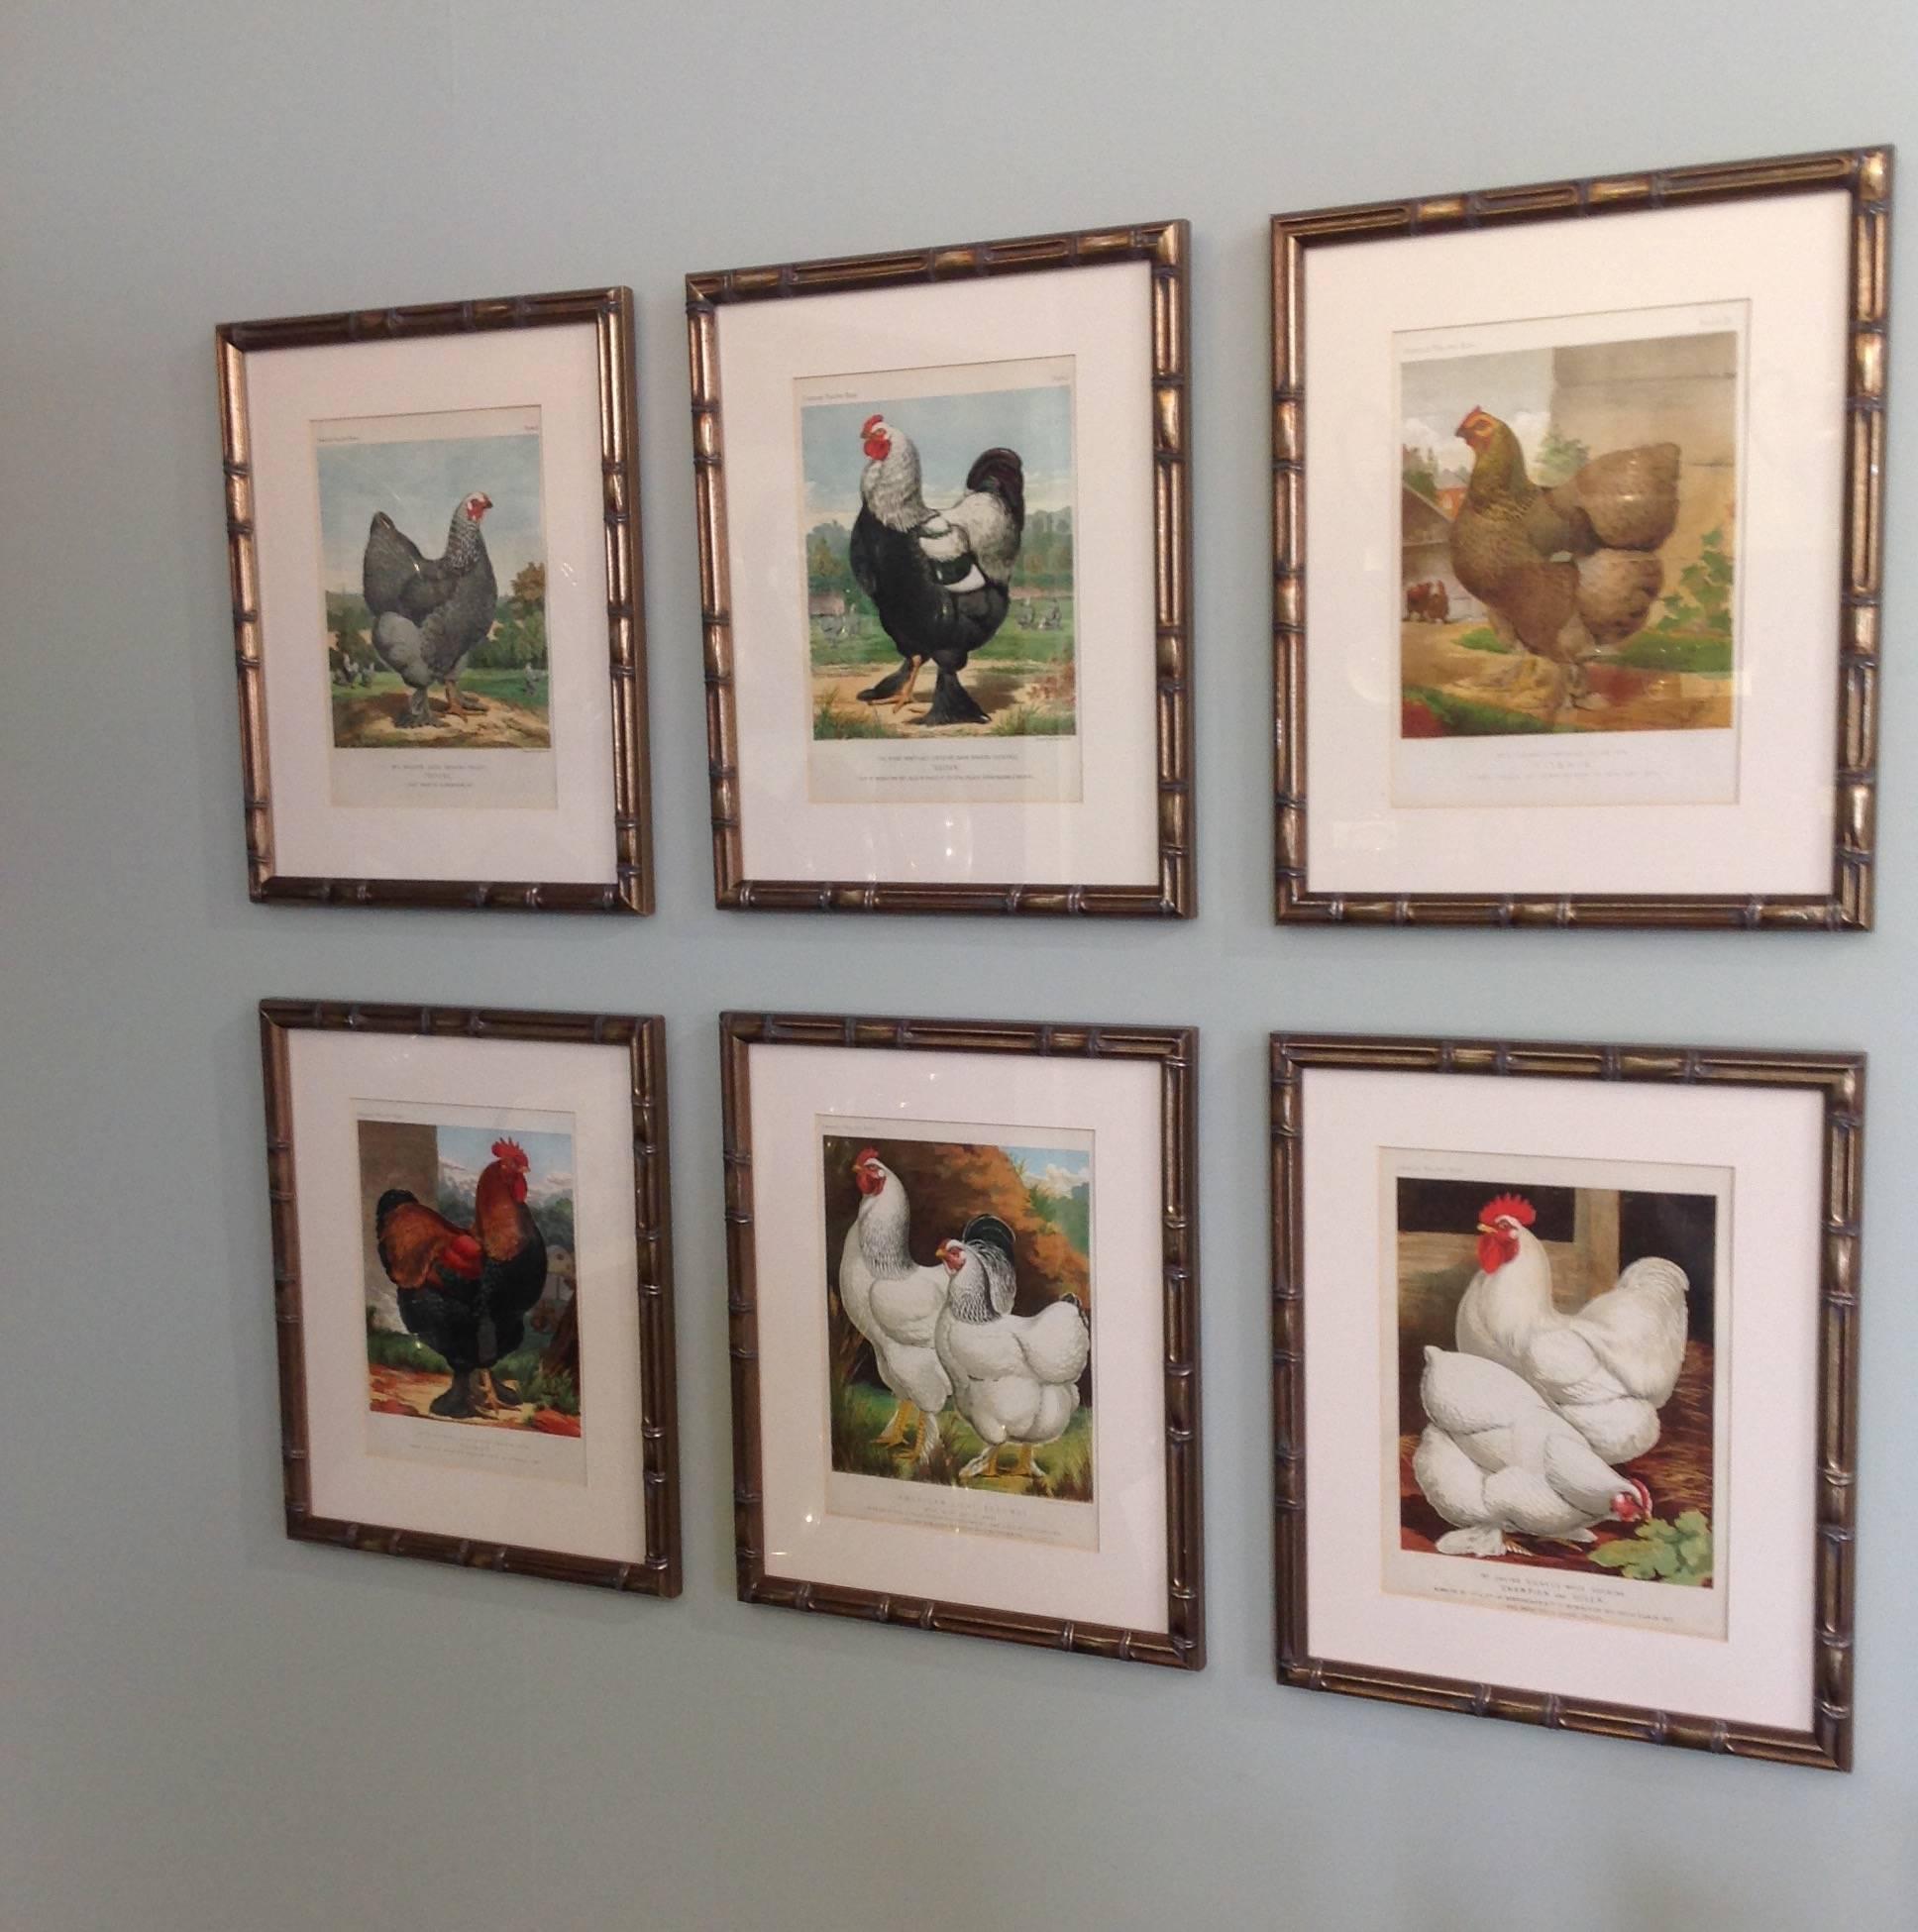 Group of six framed original lithographs from Cassell & Co.’s Poultry Book written by Lewis Wright.